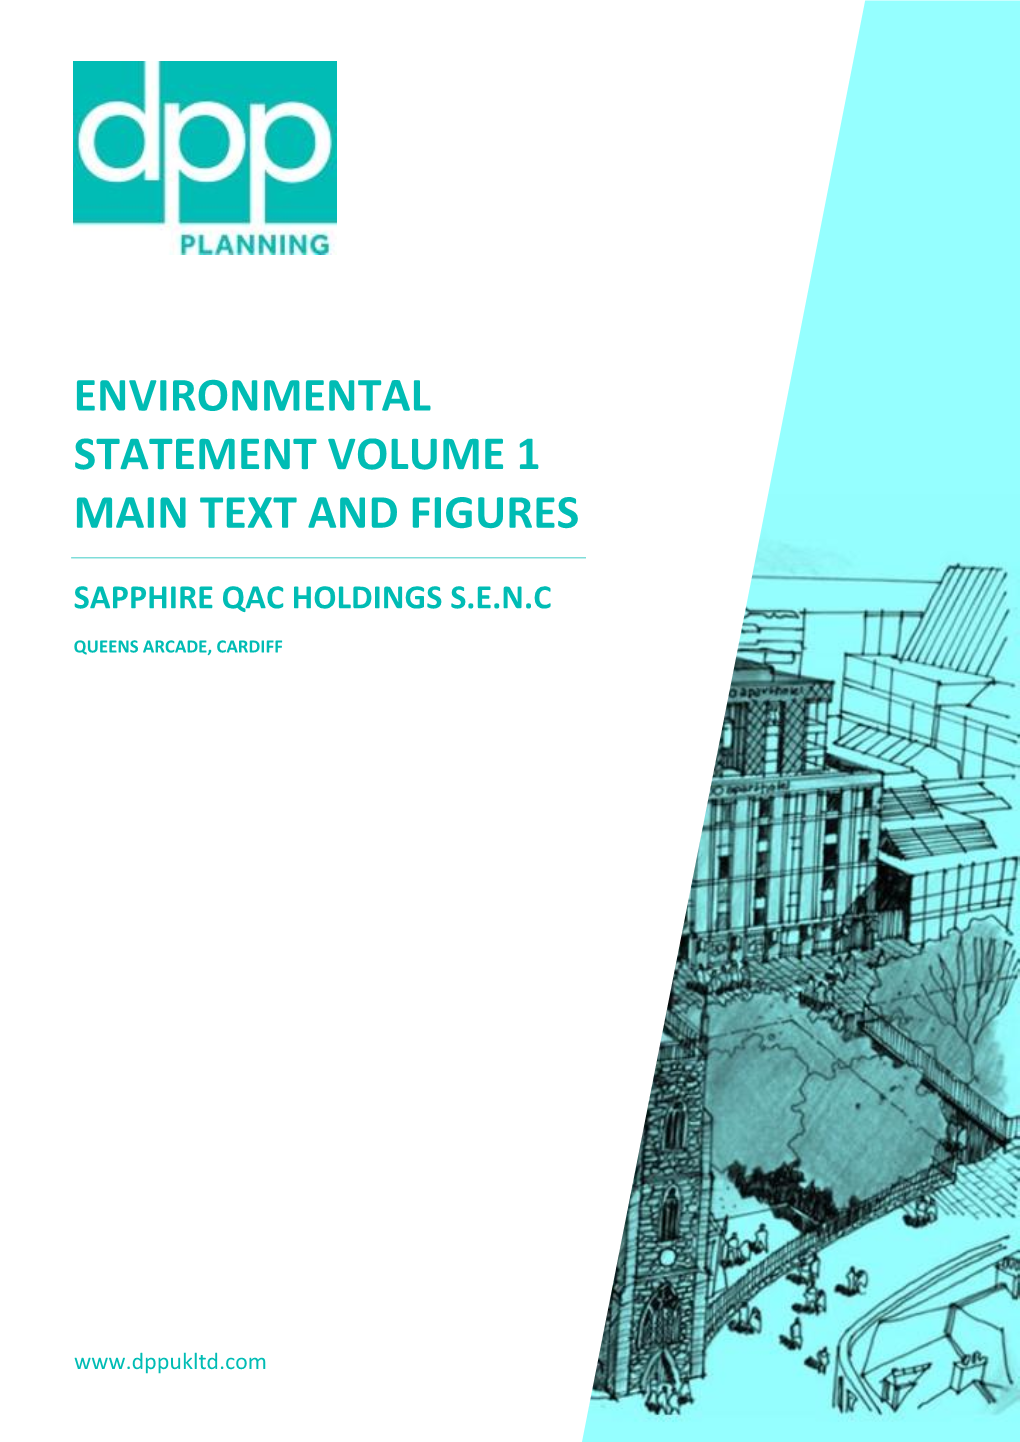 Environmental Statement Volume 1 Main Text and Figures